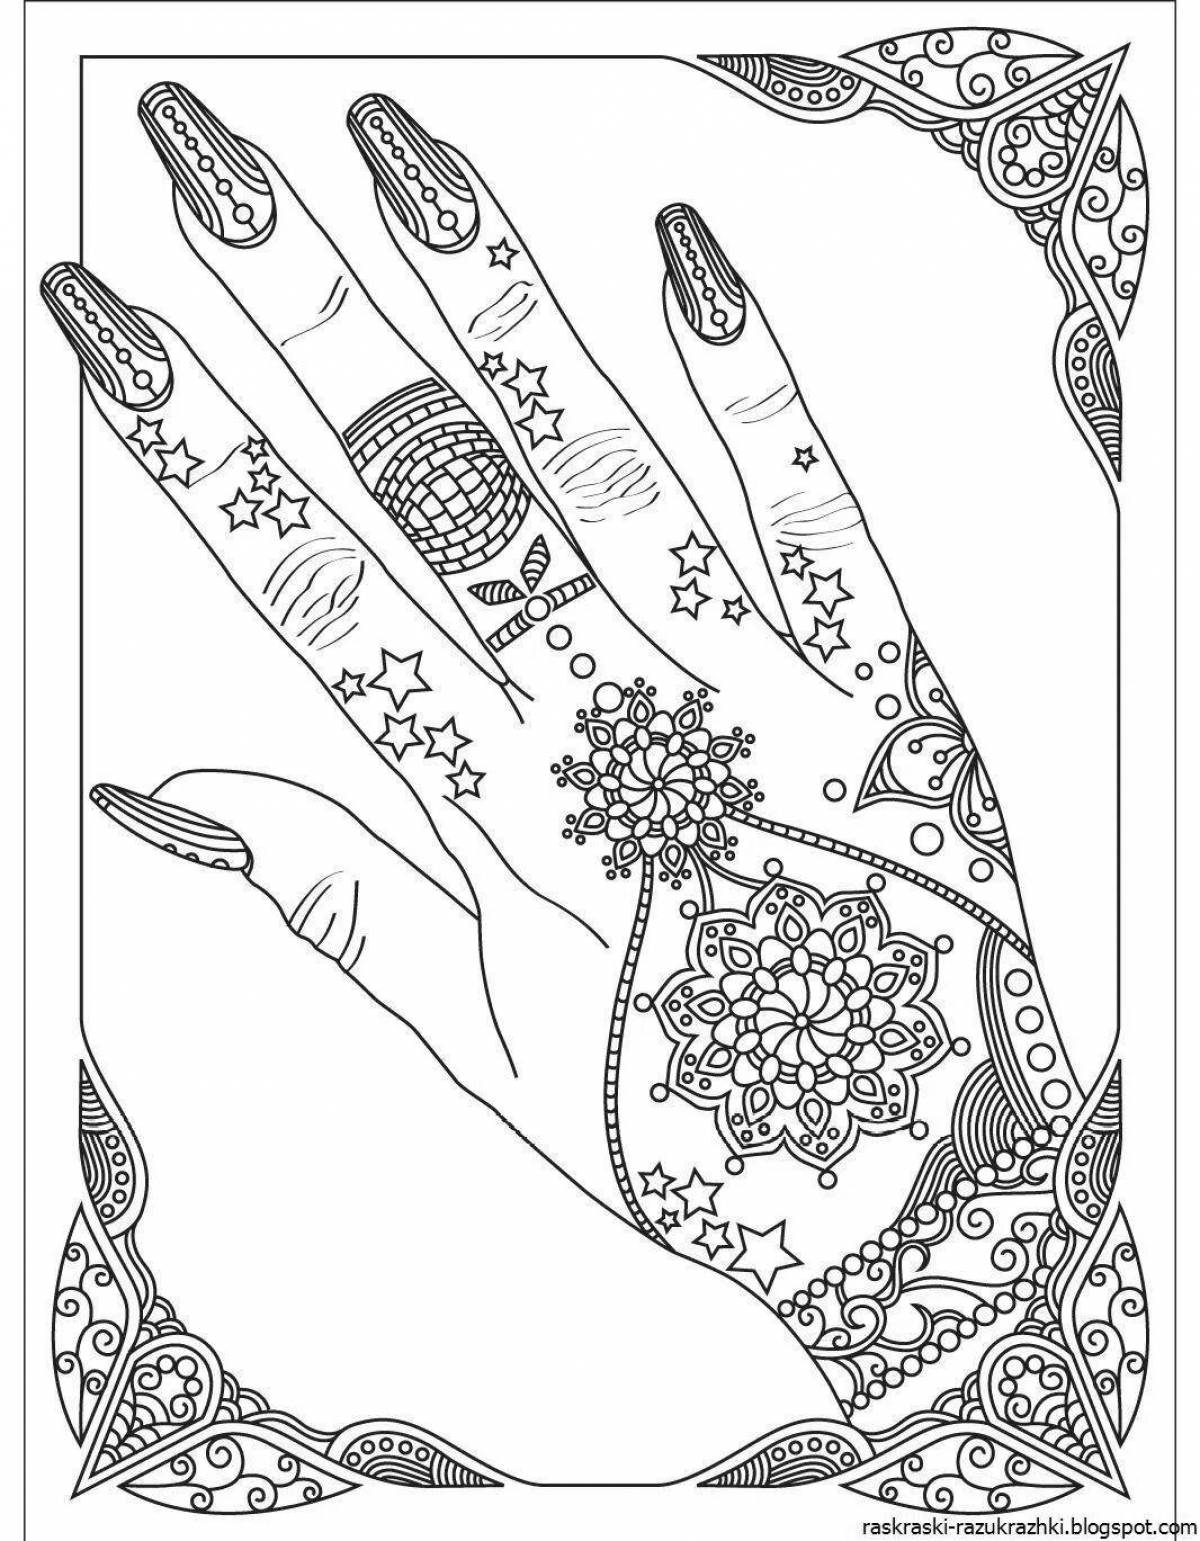 Coloring book decorated manicure for nails